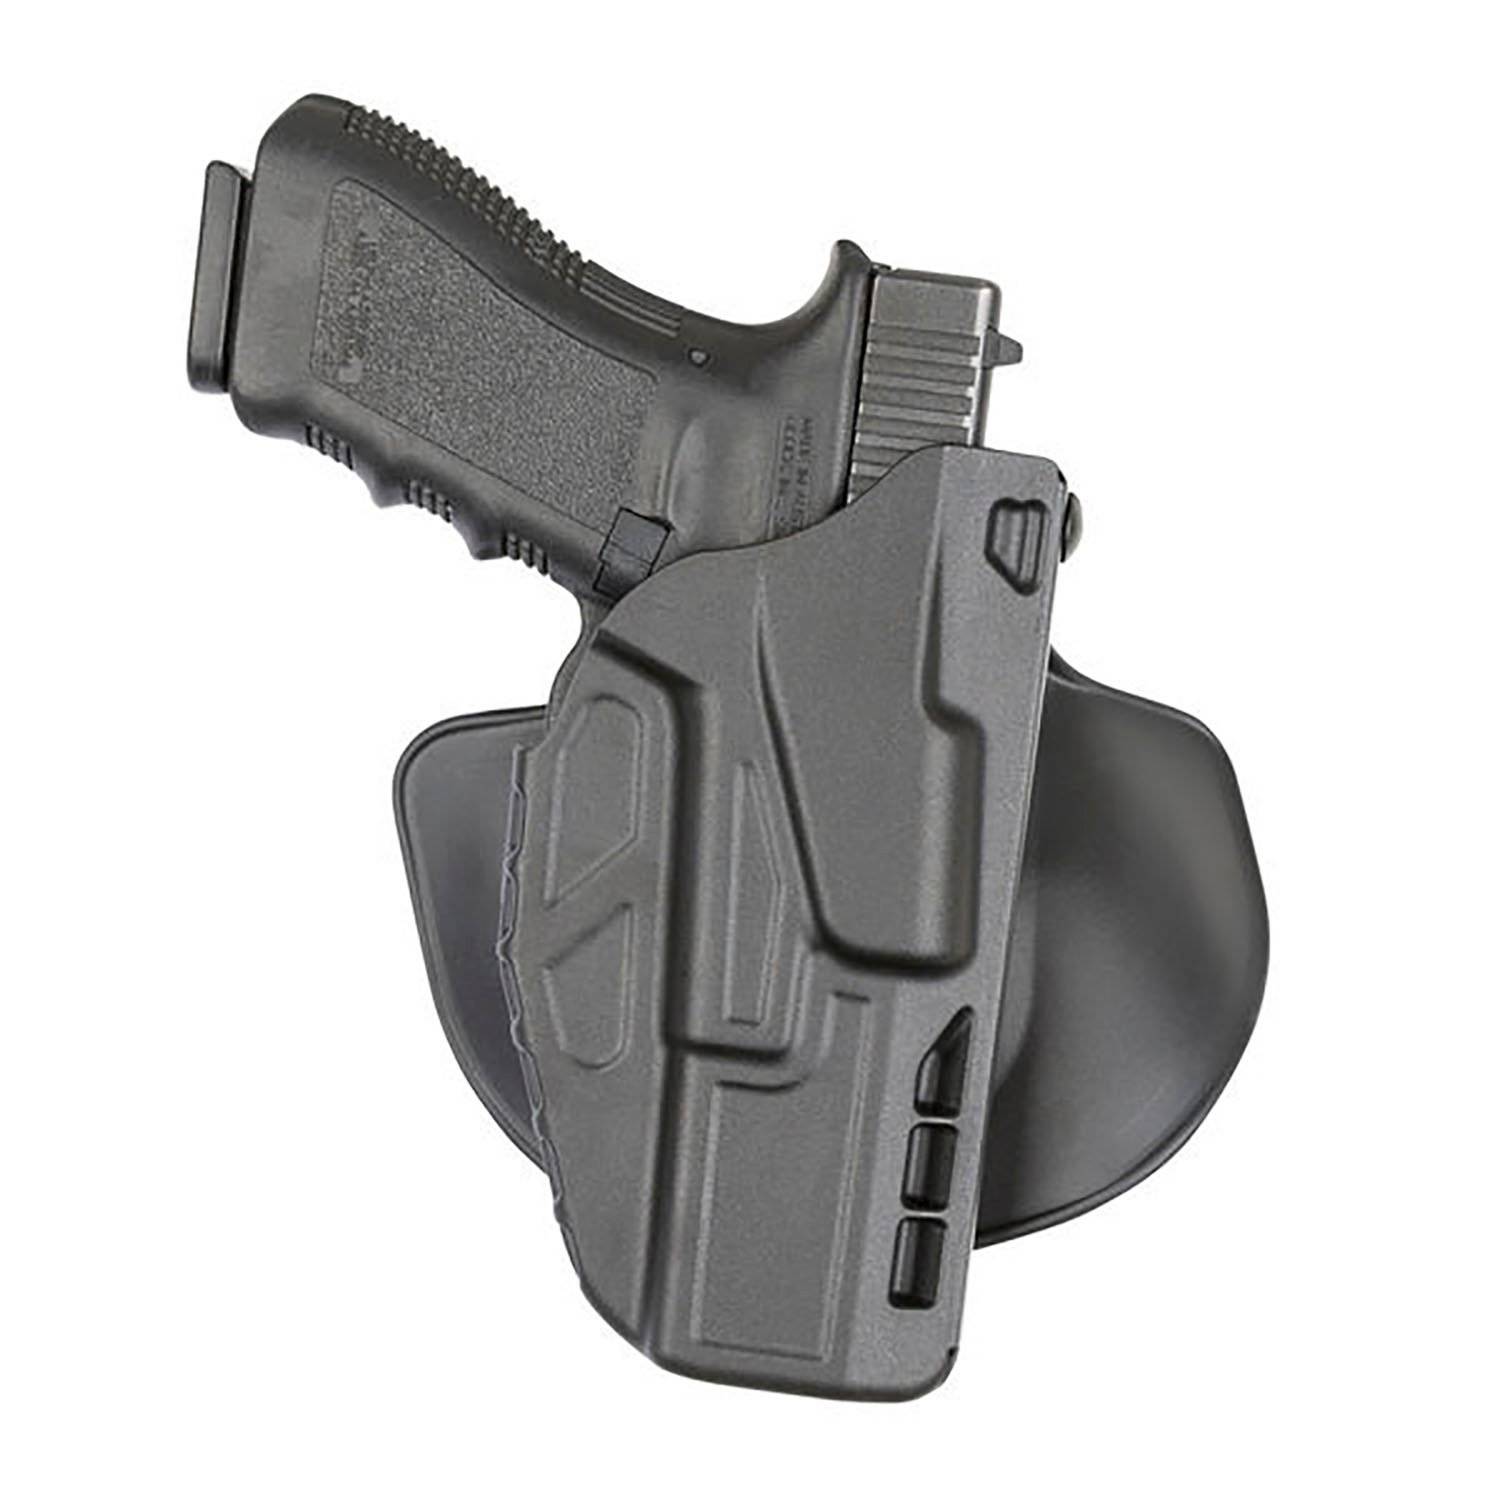 Safariland 7TS ALS Open Top Concealment Paddle Holster